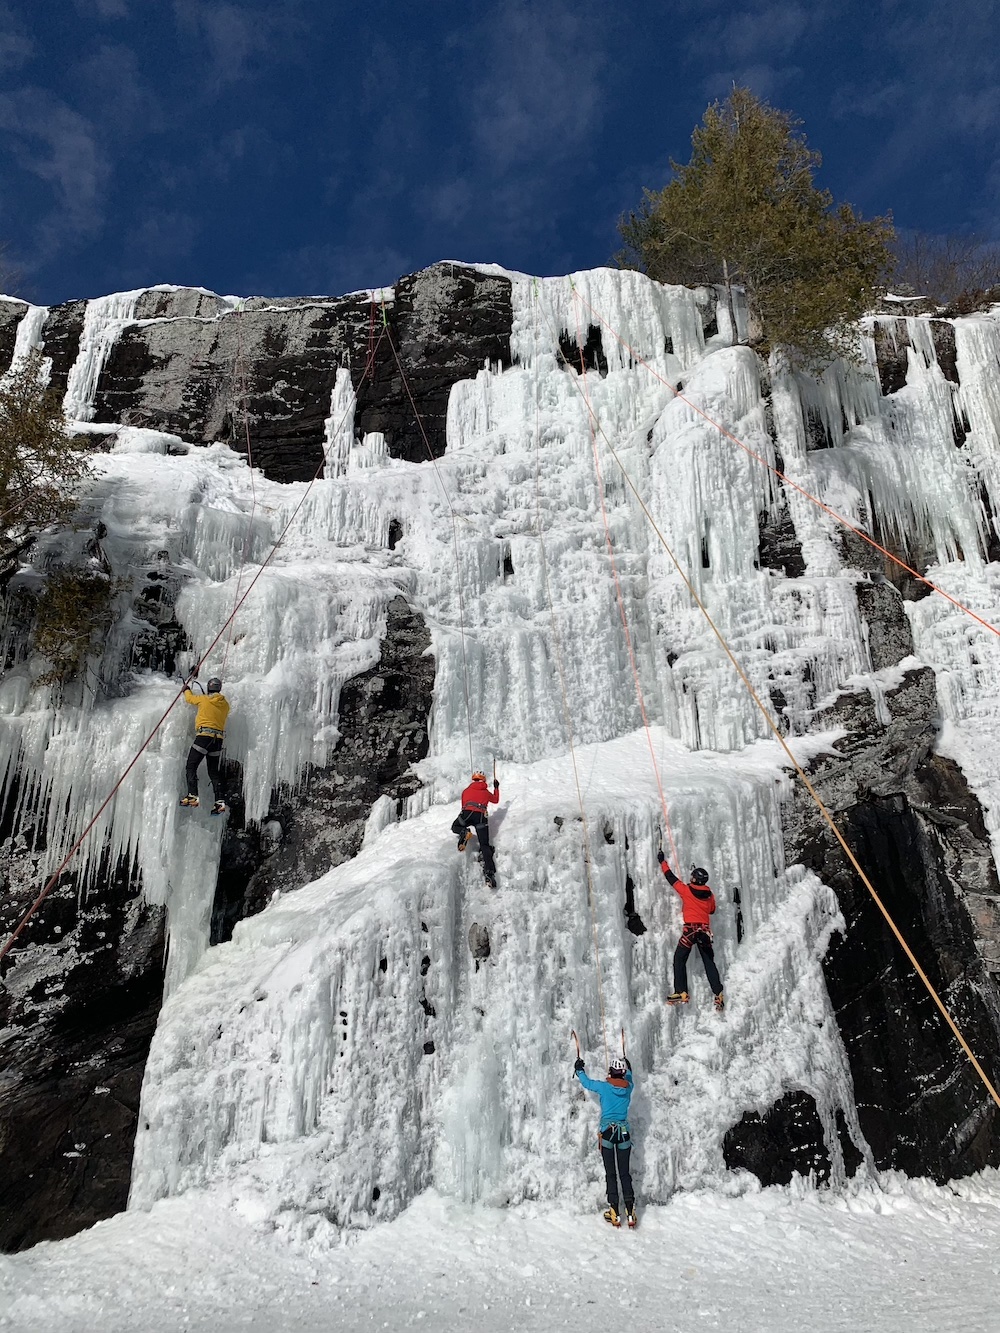 Four people climbing up frozen waterfall in the winter.